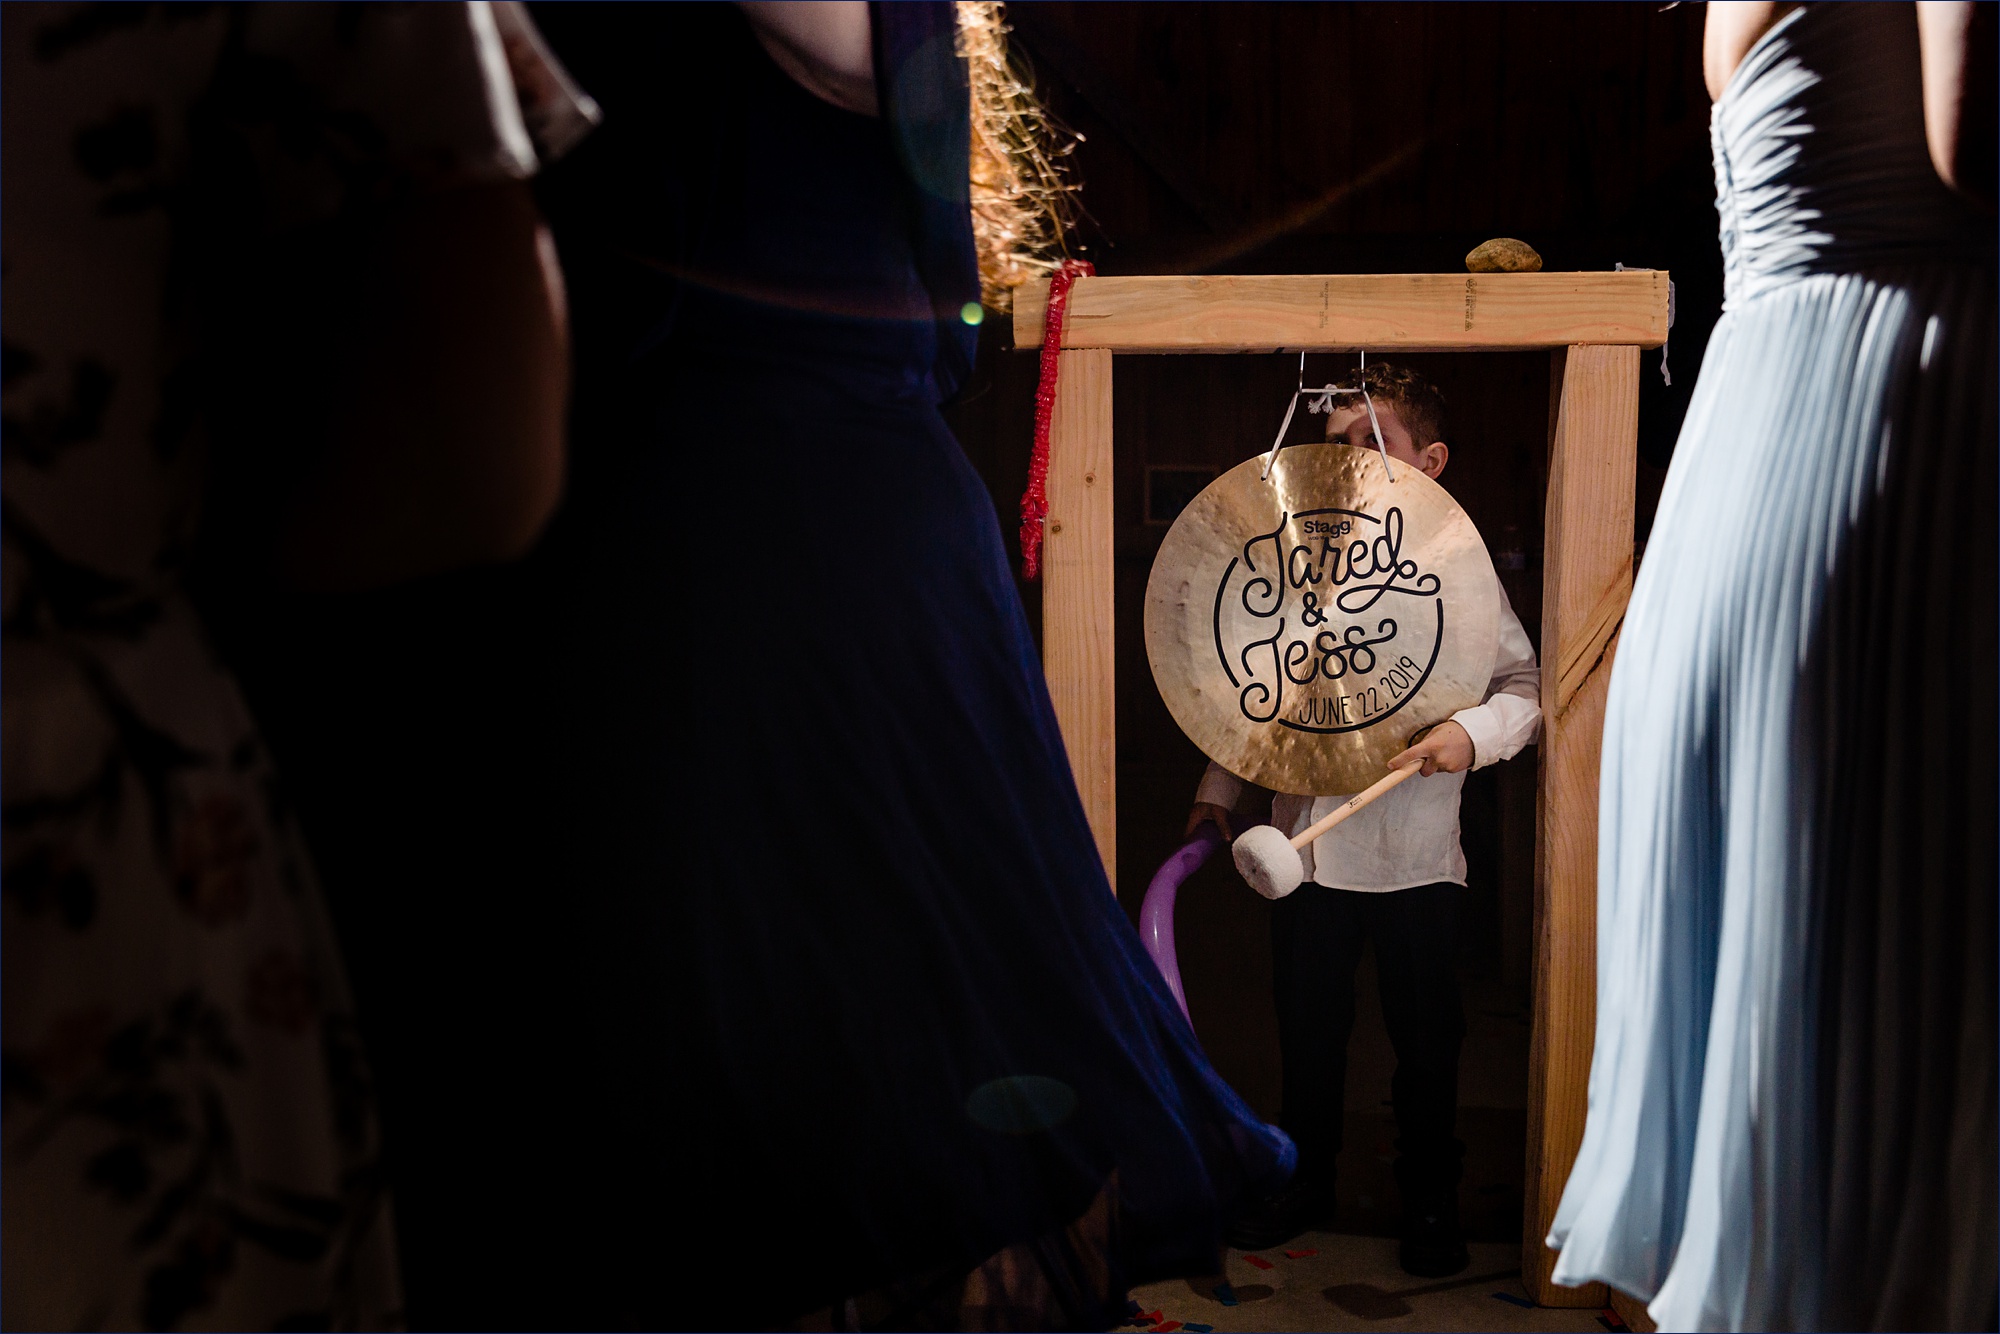 A little boy hits the wedding gong at the barn reception in NH